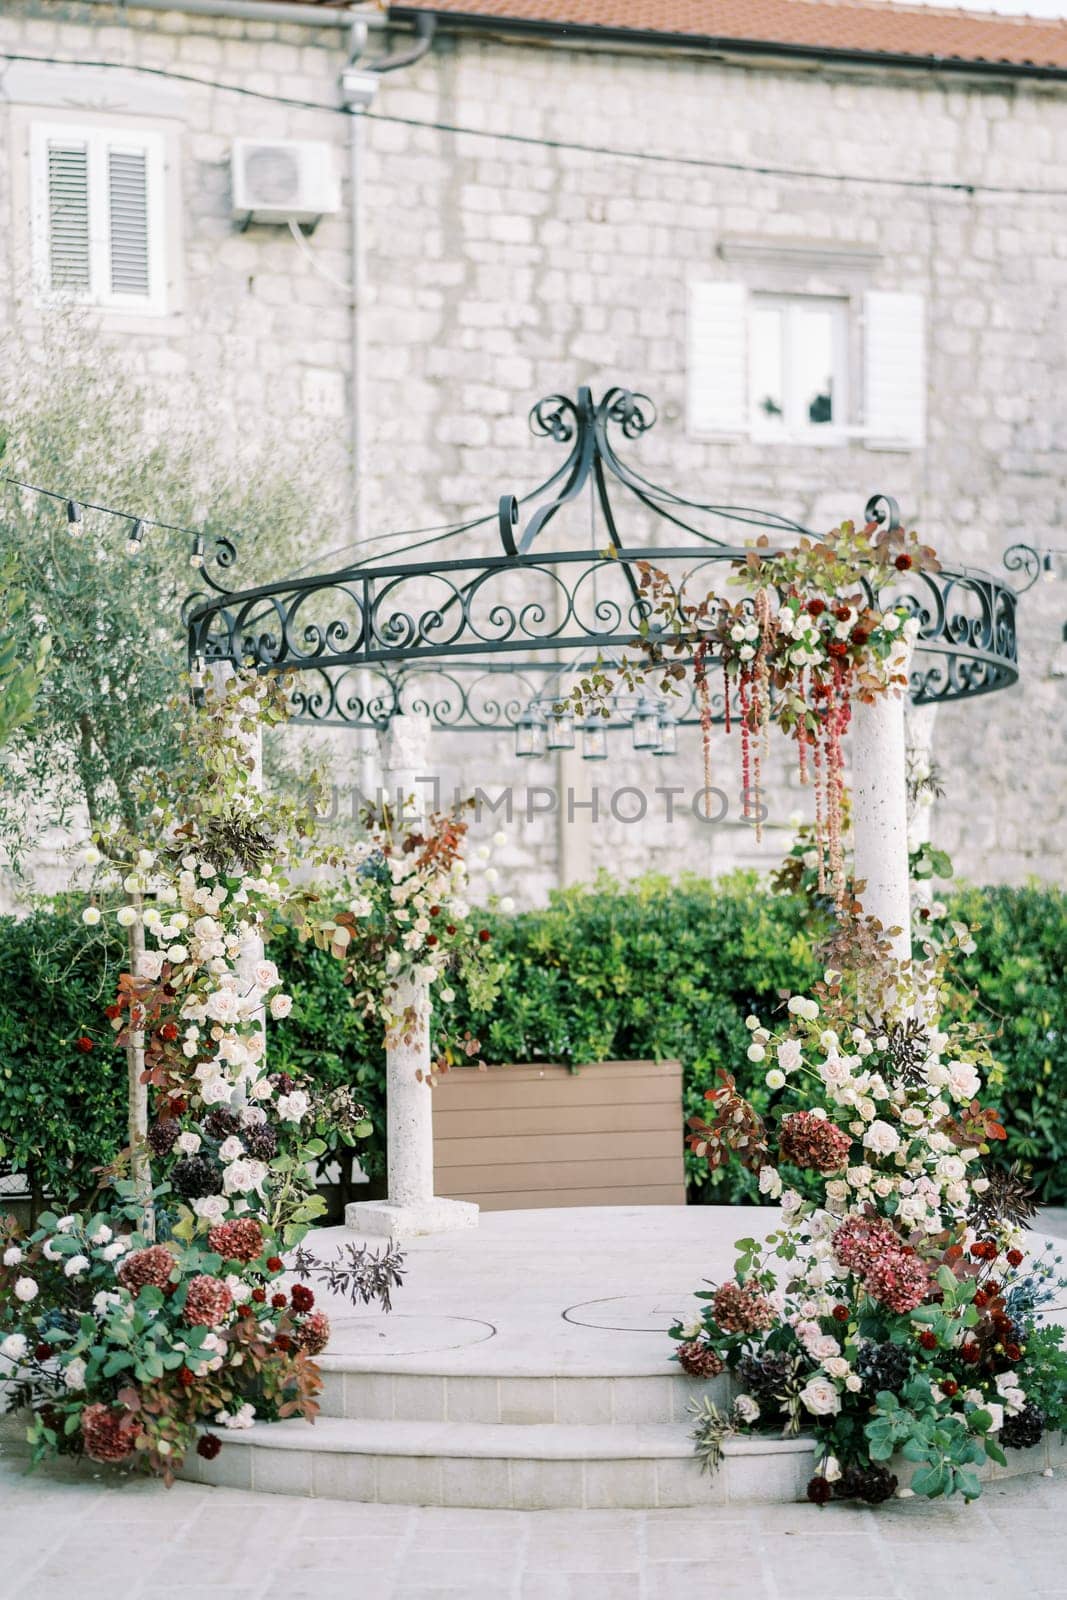 Wedding rotunda decorated with flowers in the courtyard of an ancient house by Nadtochiy